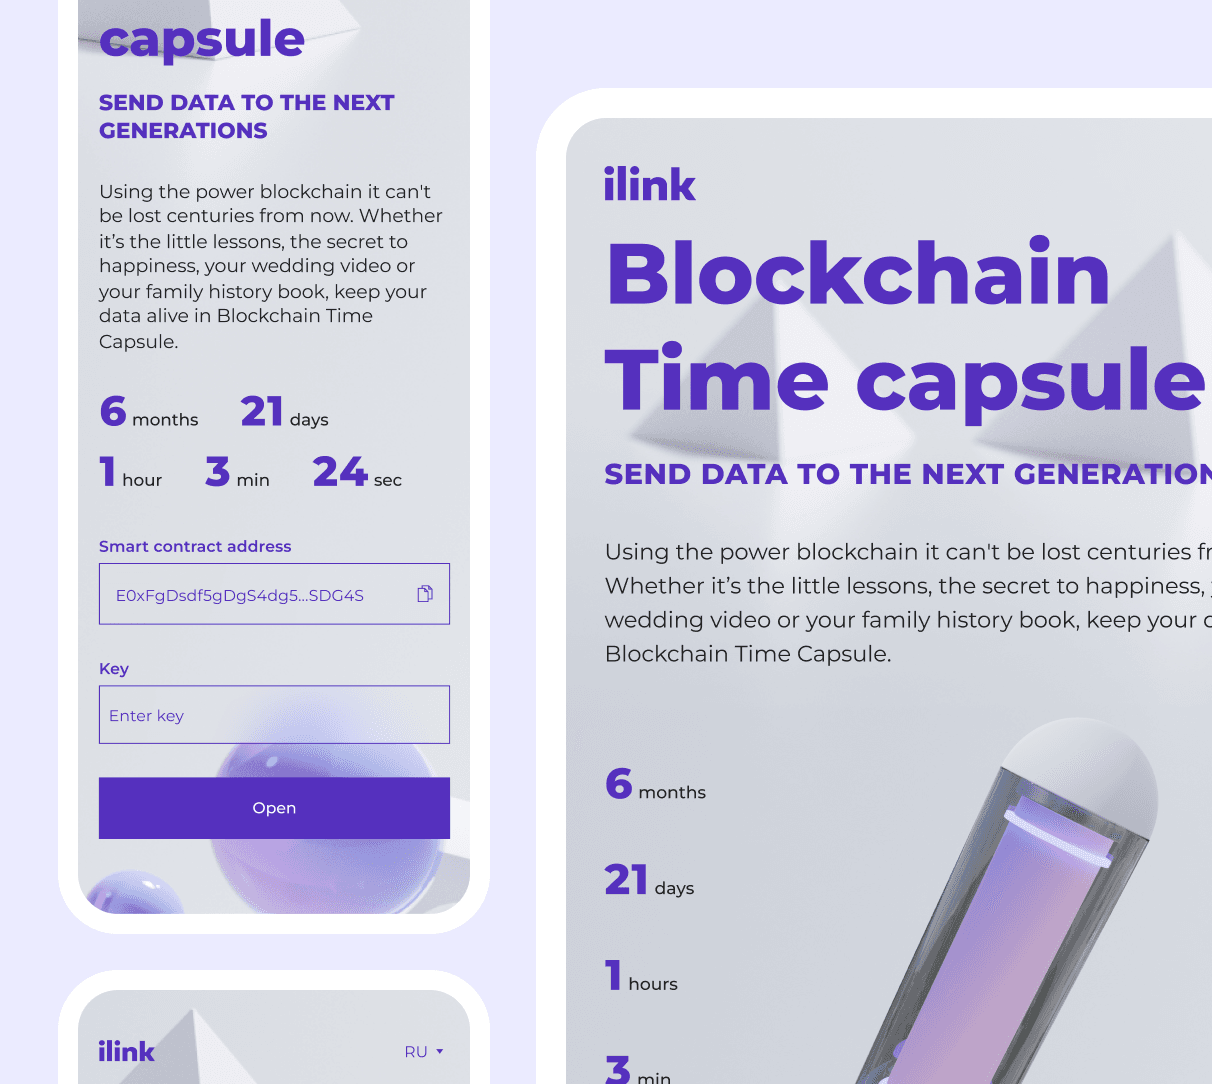 Time Capsule - The analogue of a time capsule, only in the blockchain, which contains a message to posterity.